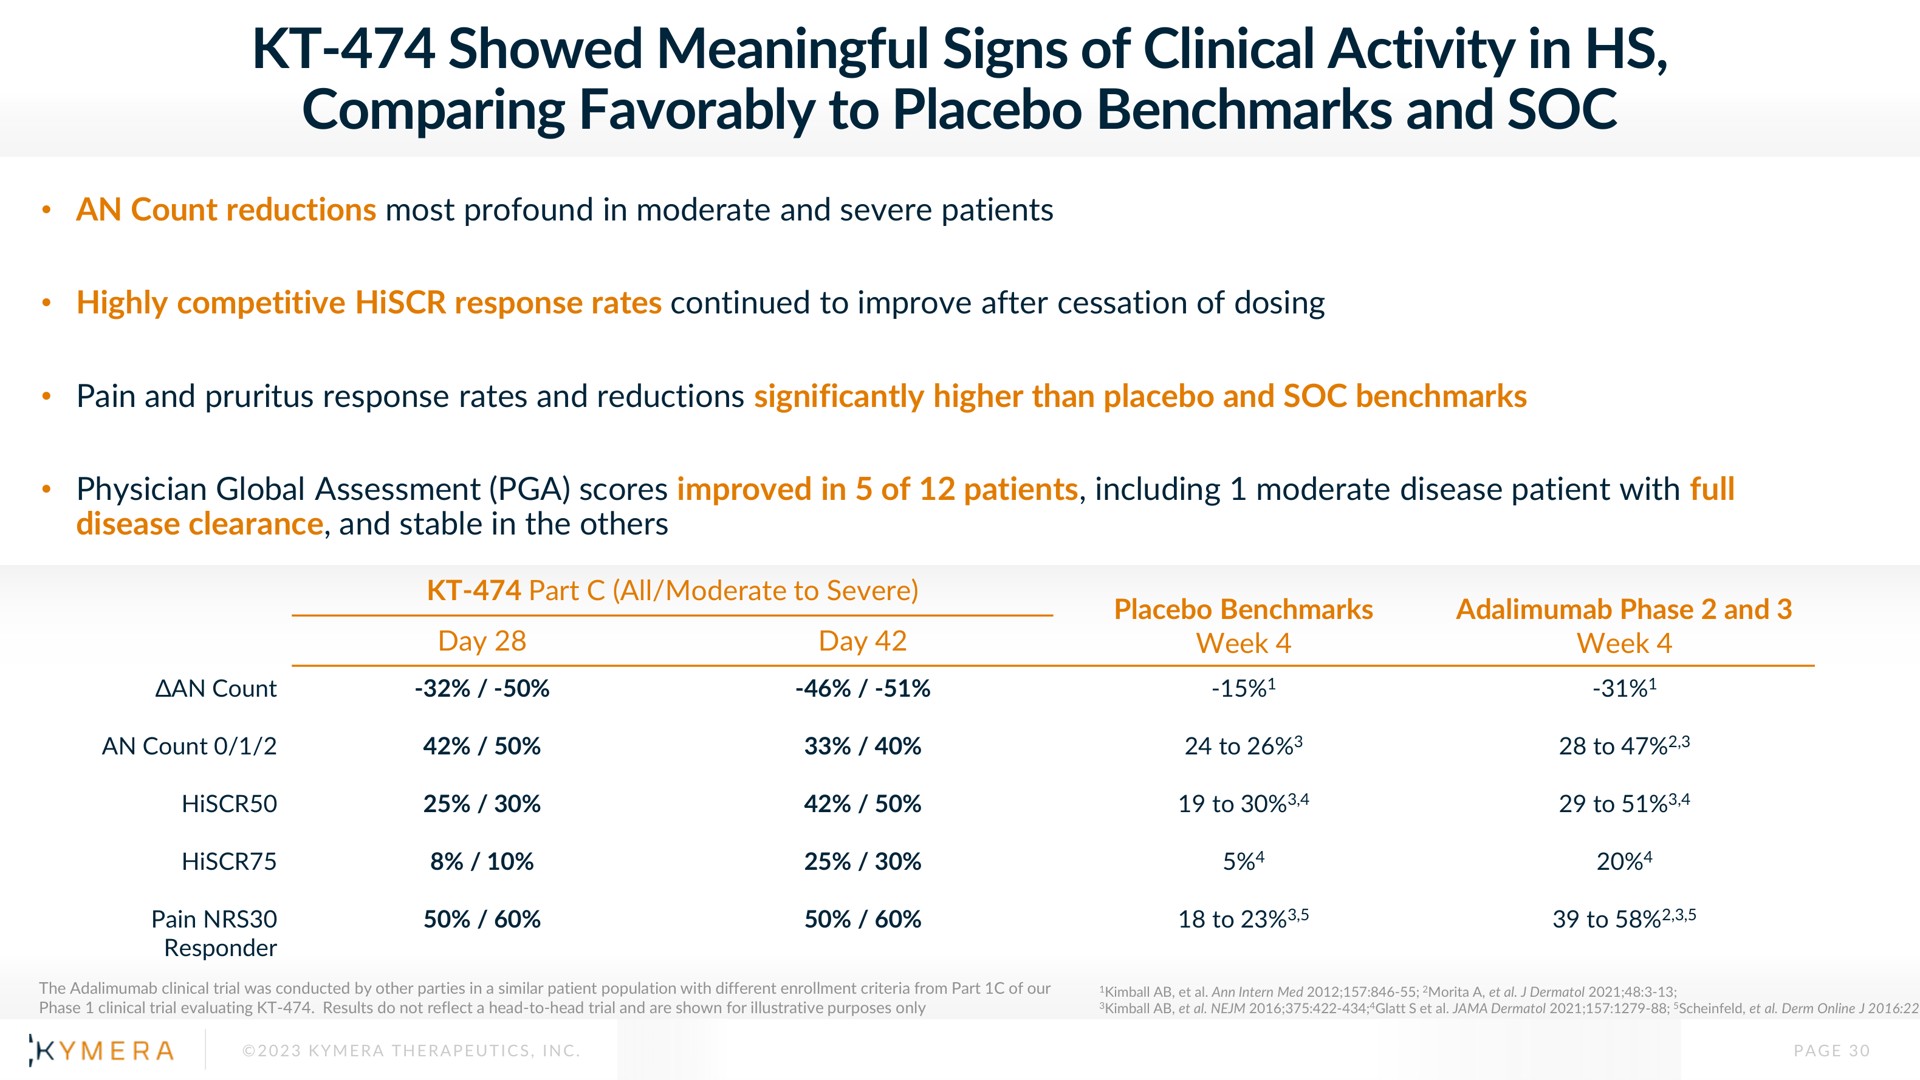 showed meaningful signs of clinical activity in comparing favorably to placebo and soc | Kymera